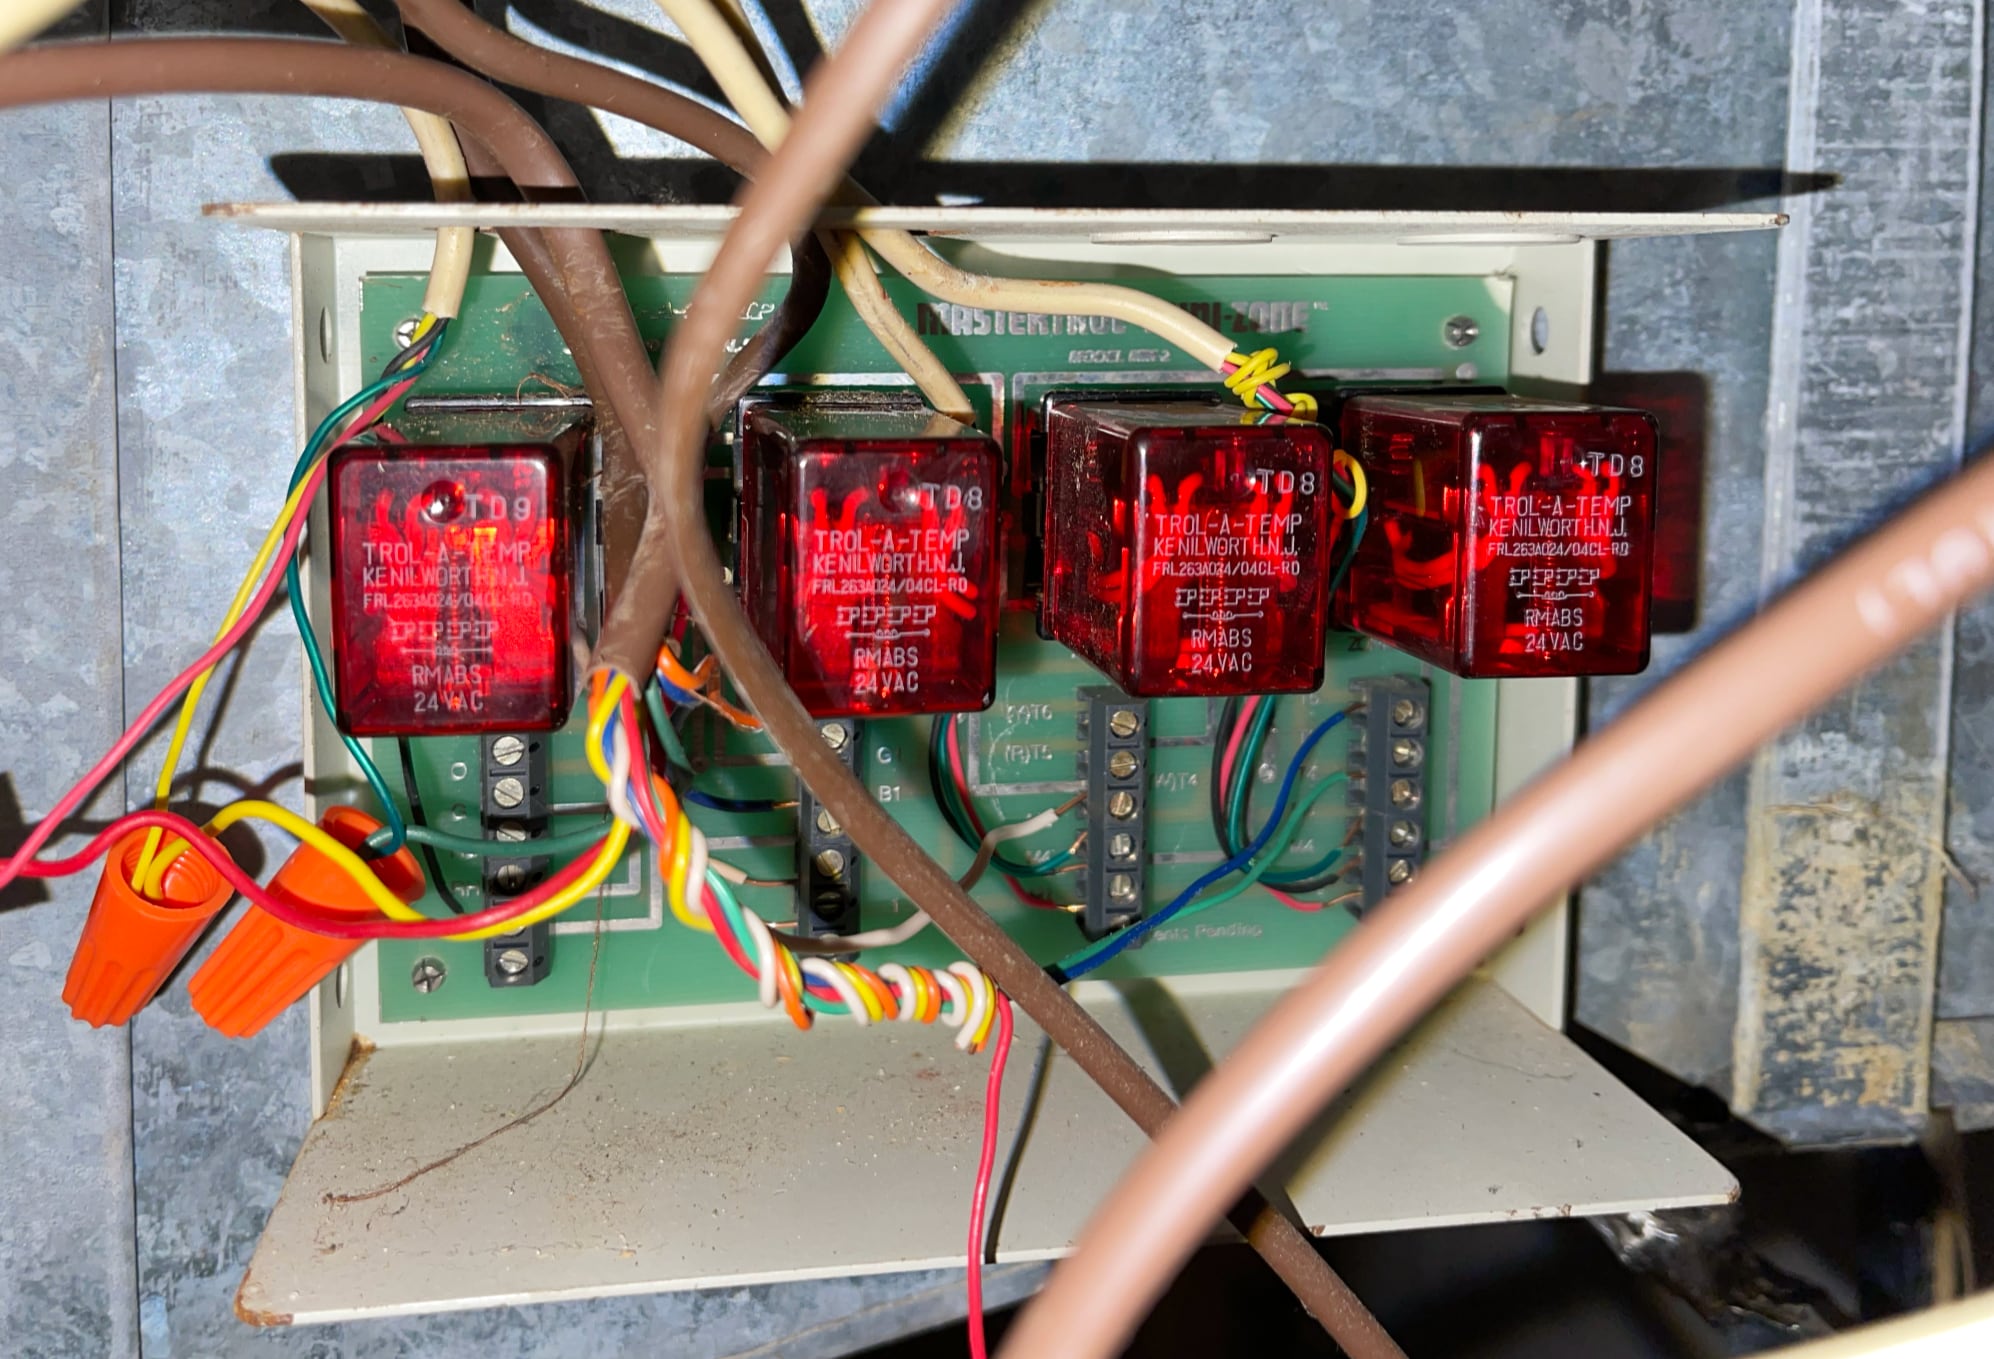 Old zone controller after “rework” by HVAC company